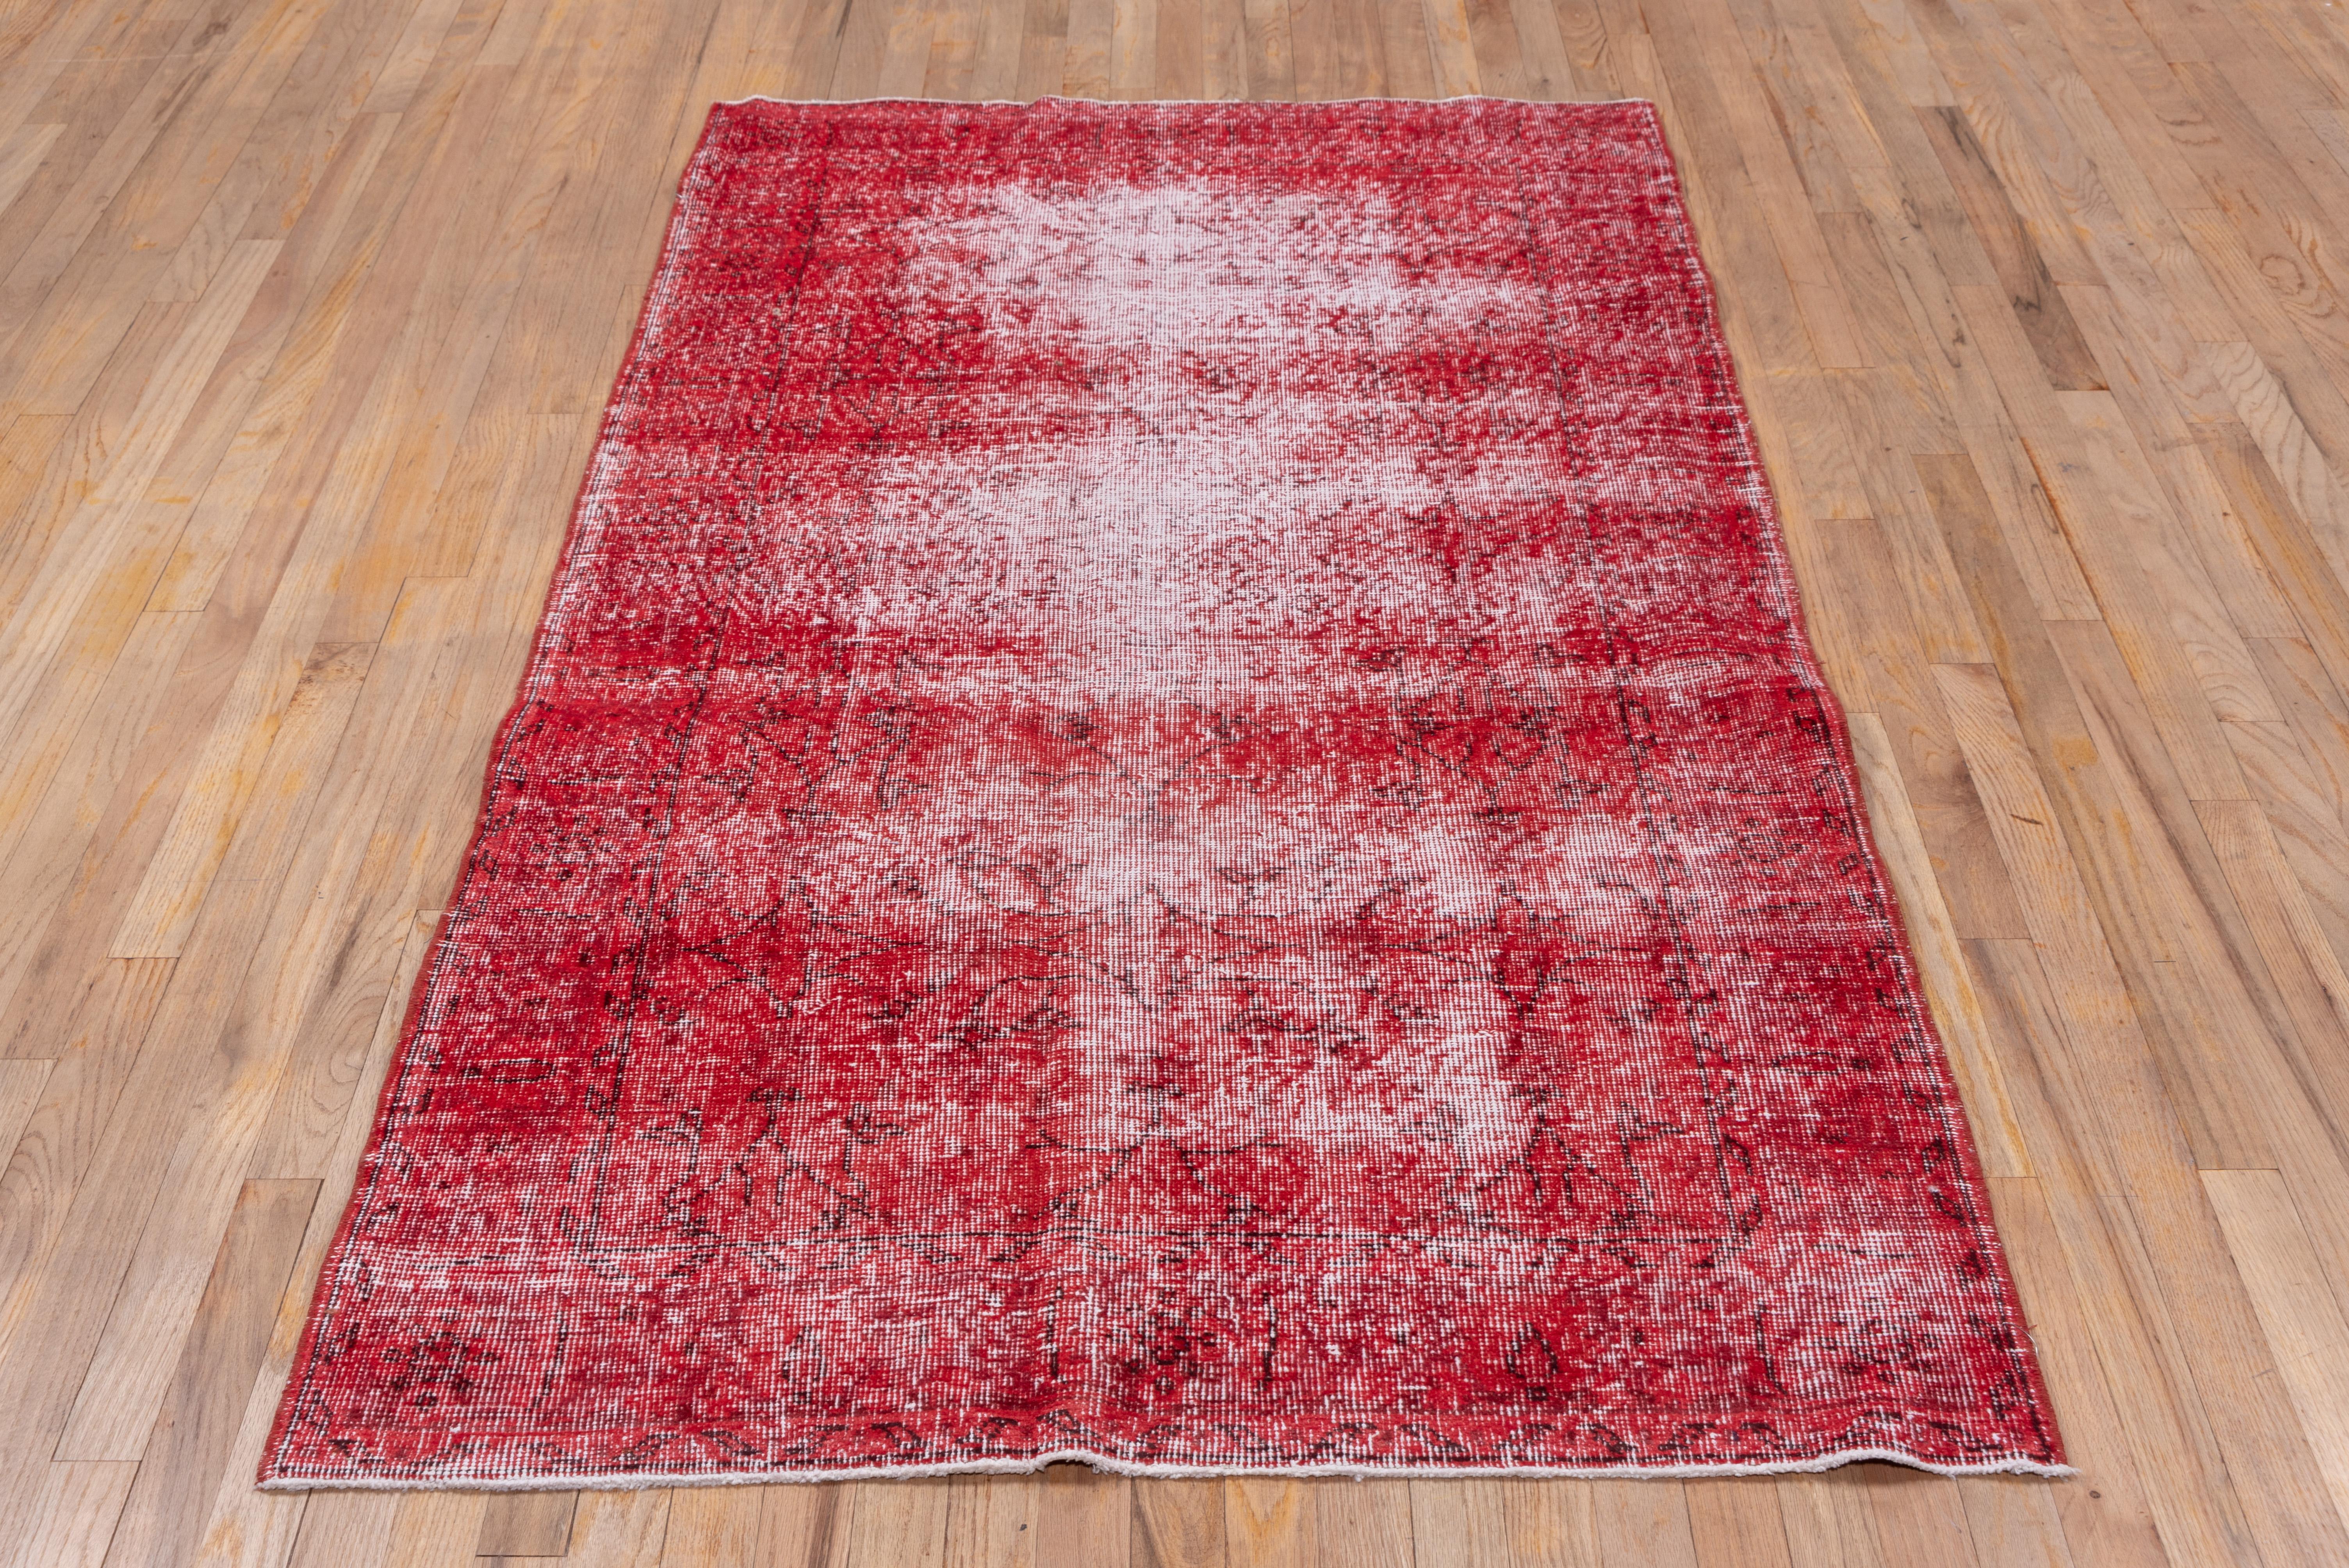 This red shabby chic Turkish overdyed Sparta carpet has a pattern defined by the wear beyond the all-over general distress. Vertical and horizontal off white strips cross near the center. Shabby chic conditions and can offer some great texture for